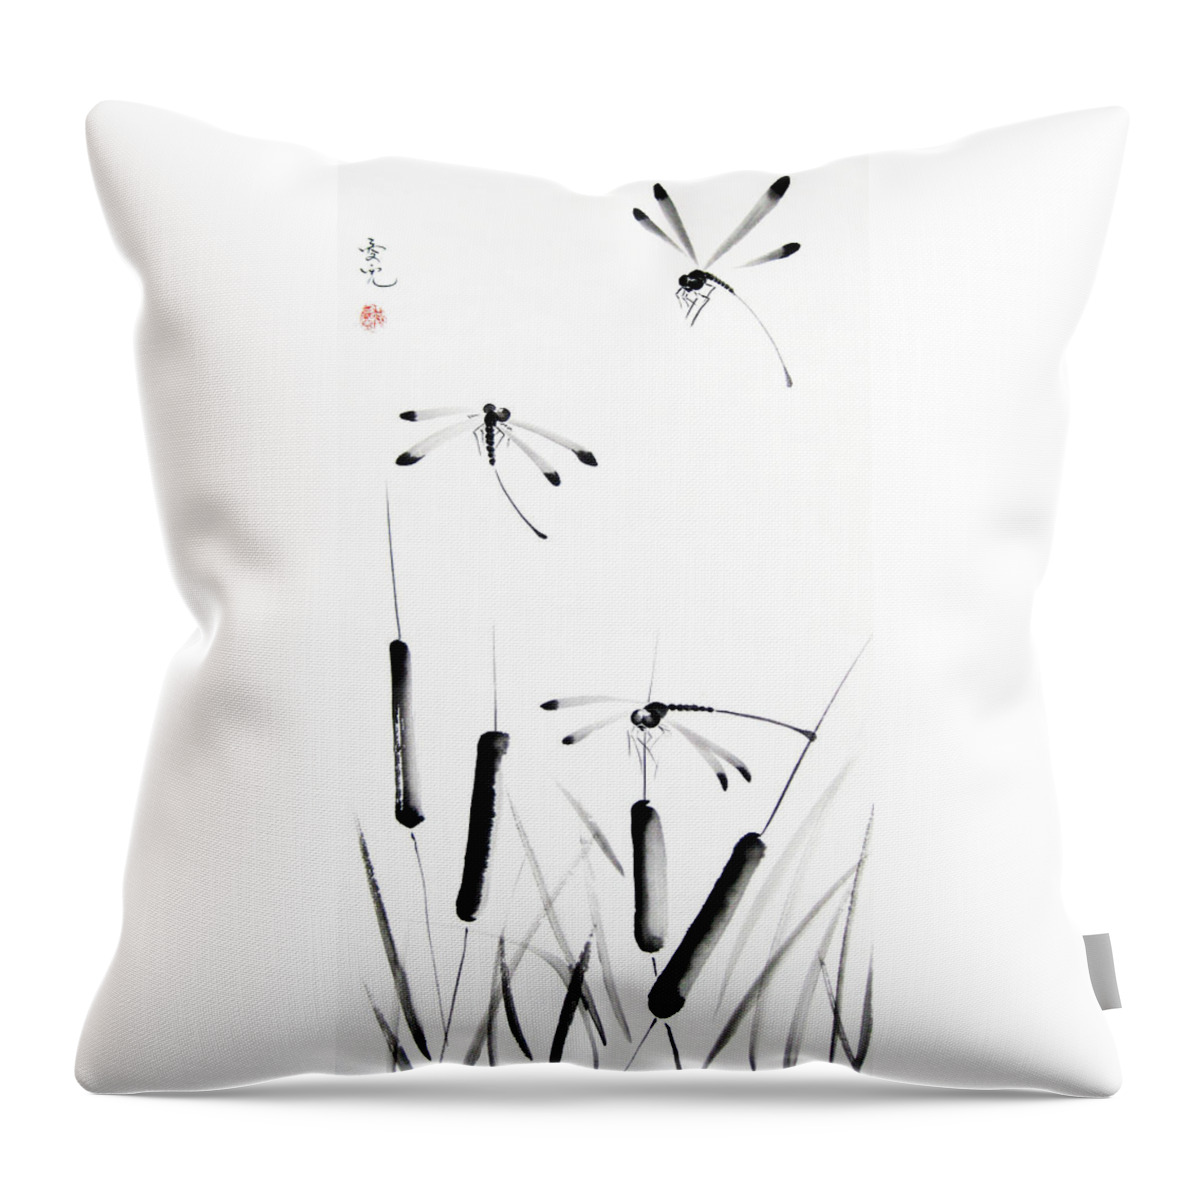 Dragonfly Throw Pillow featuring the painting Dragonfly Dance by Oiyee At Oystudio